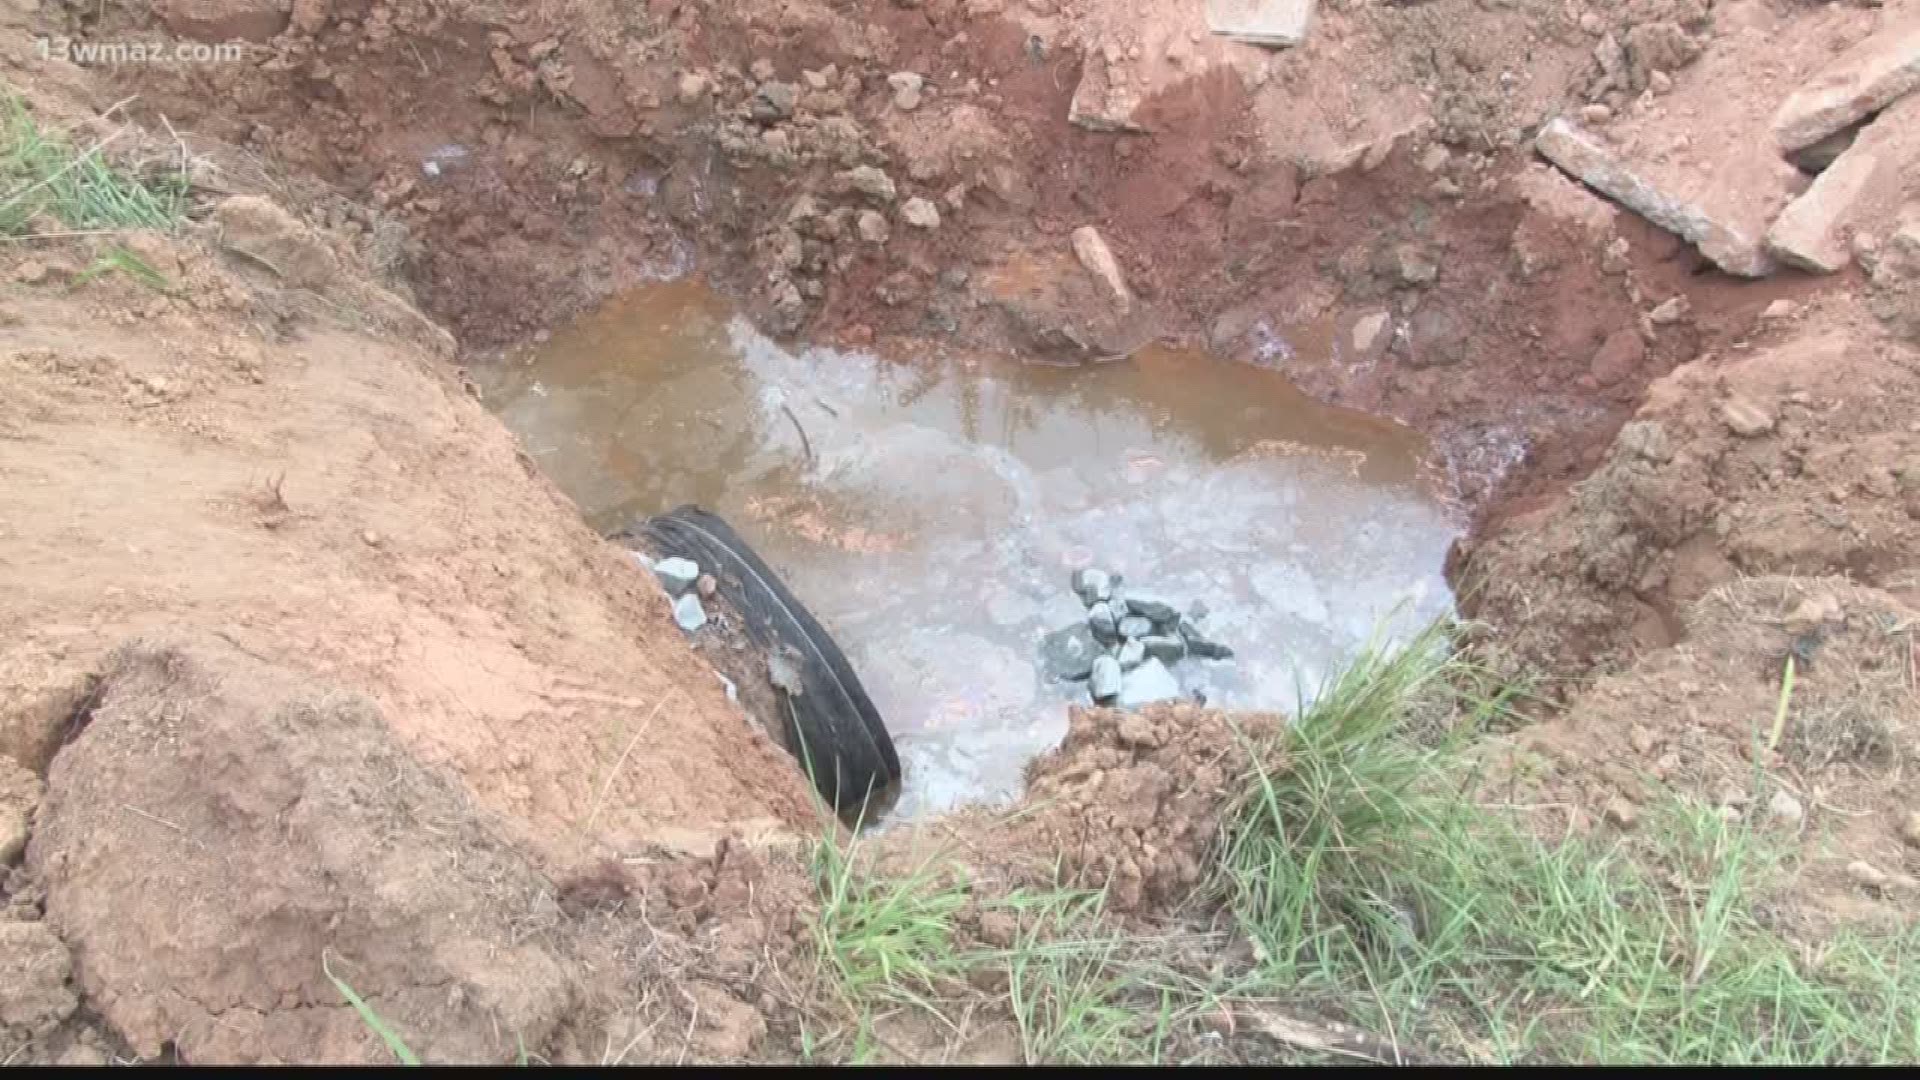 A Baldwin County couple says a damaged storm drain is causing a pond on their property to flood into their yard. They want the county to fix the issue.